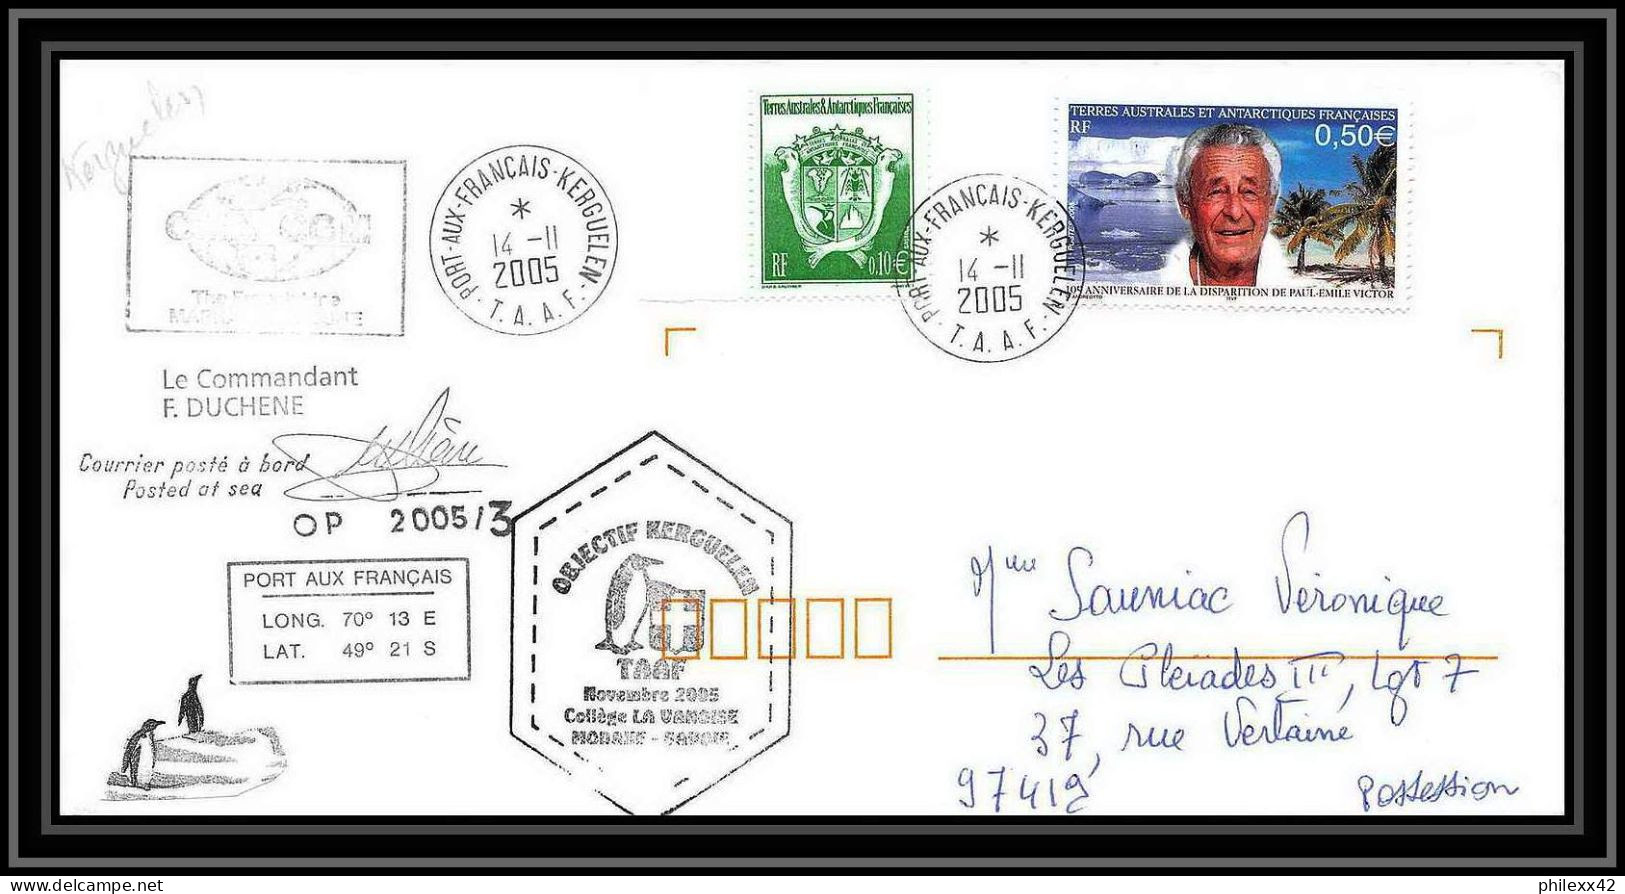 2536 ANTARCTIC Terres Australes TAAF Lettre Cover Dufresne 2 Signé Signed Op 2005/3 KERGUELEN 14/11/2005 N°417 - Covers & Documents